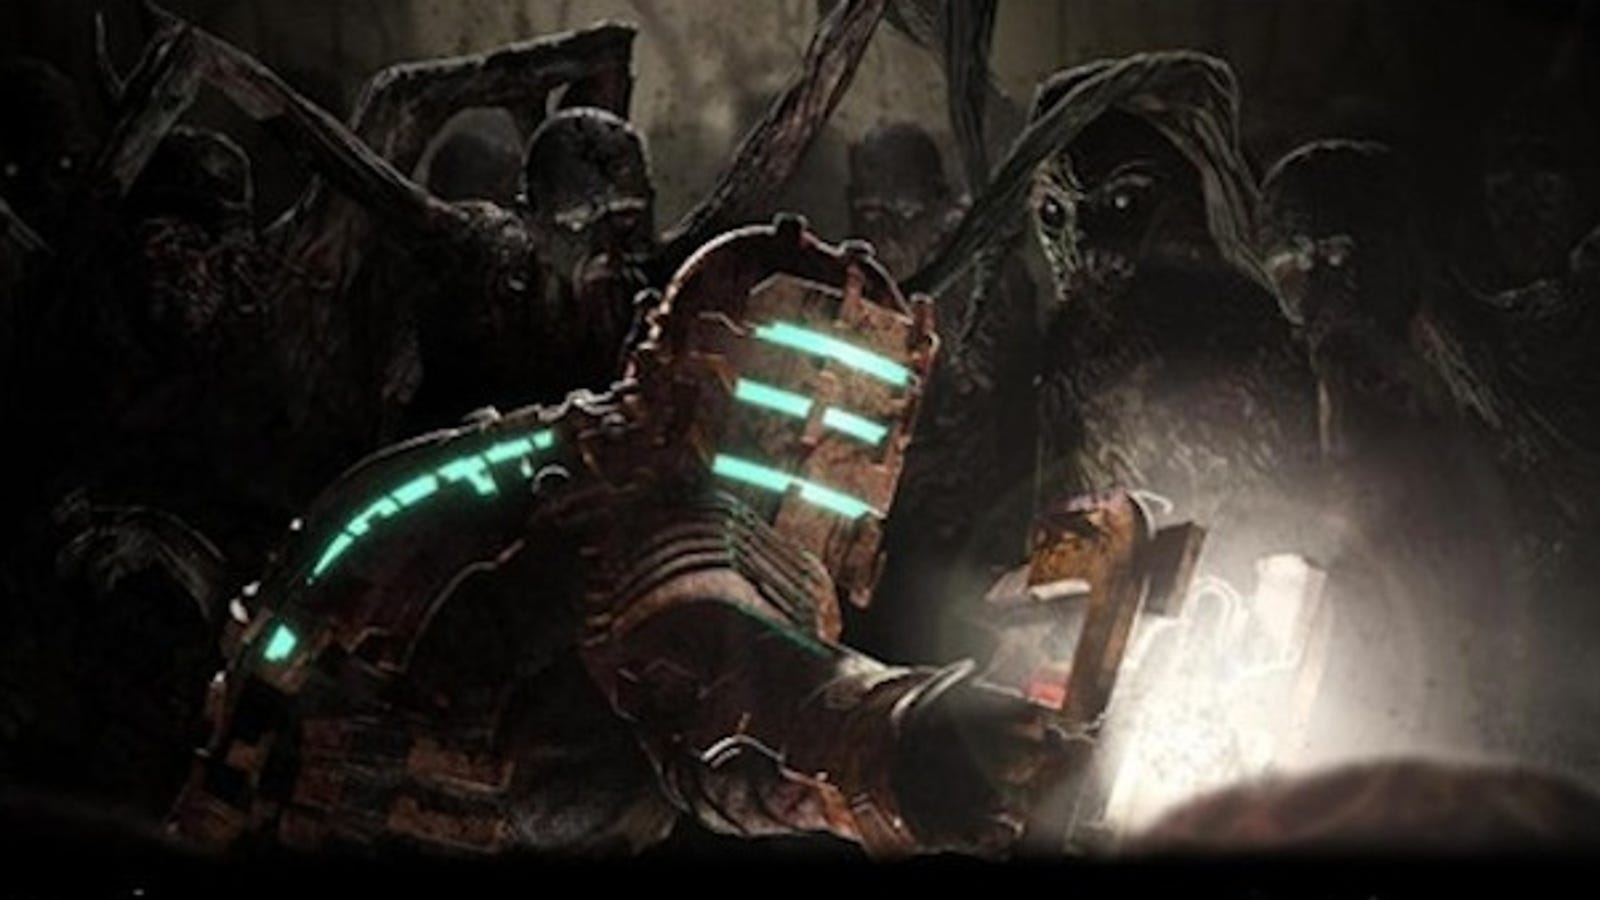 dead space story 1 explained